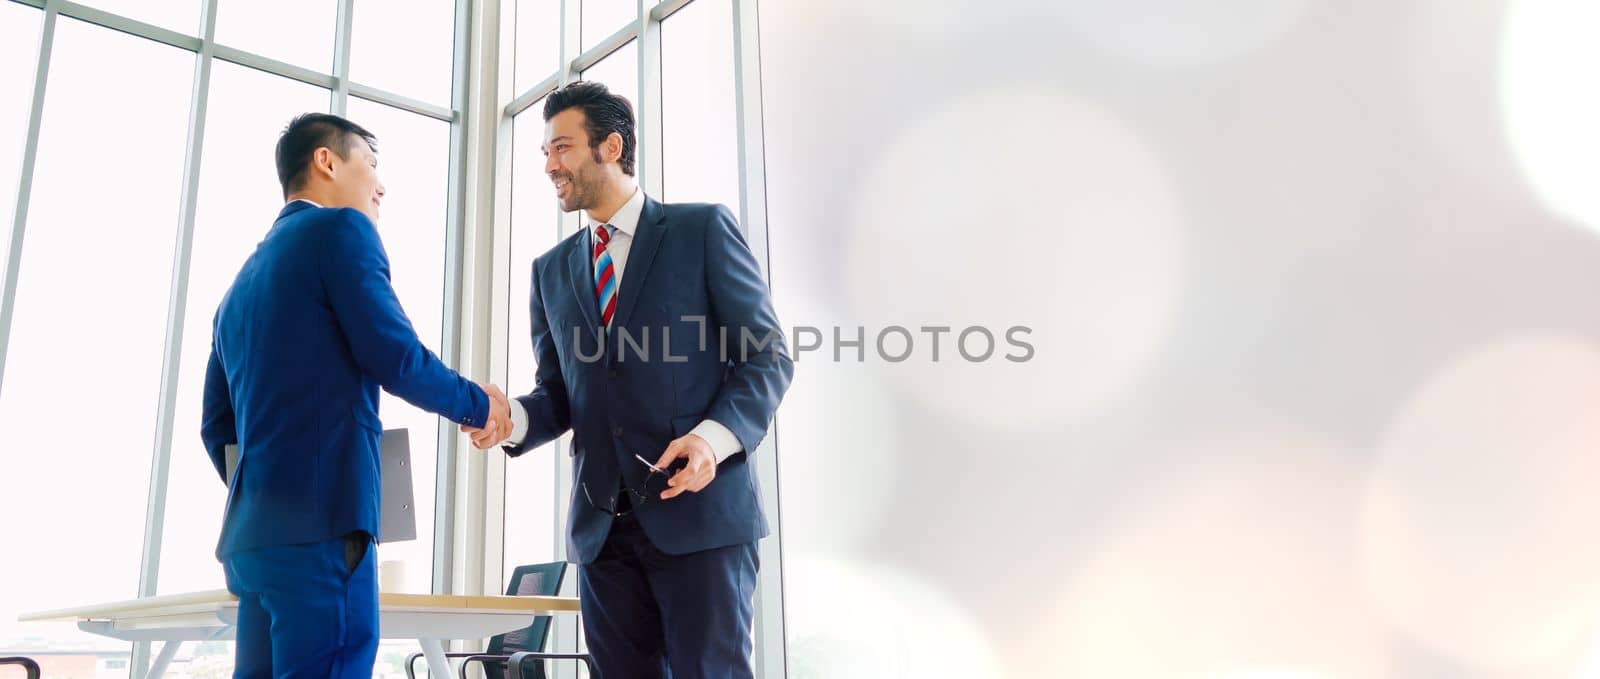 Business people handshake in corporate office in widen view showing professional agreement on a financial deal contract.